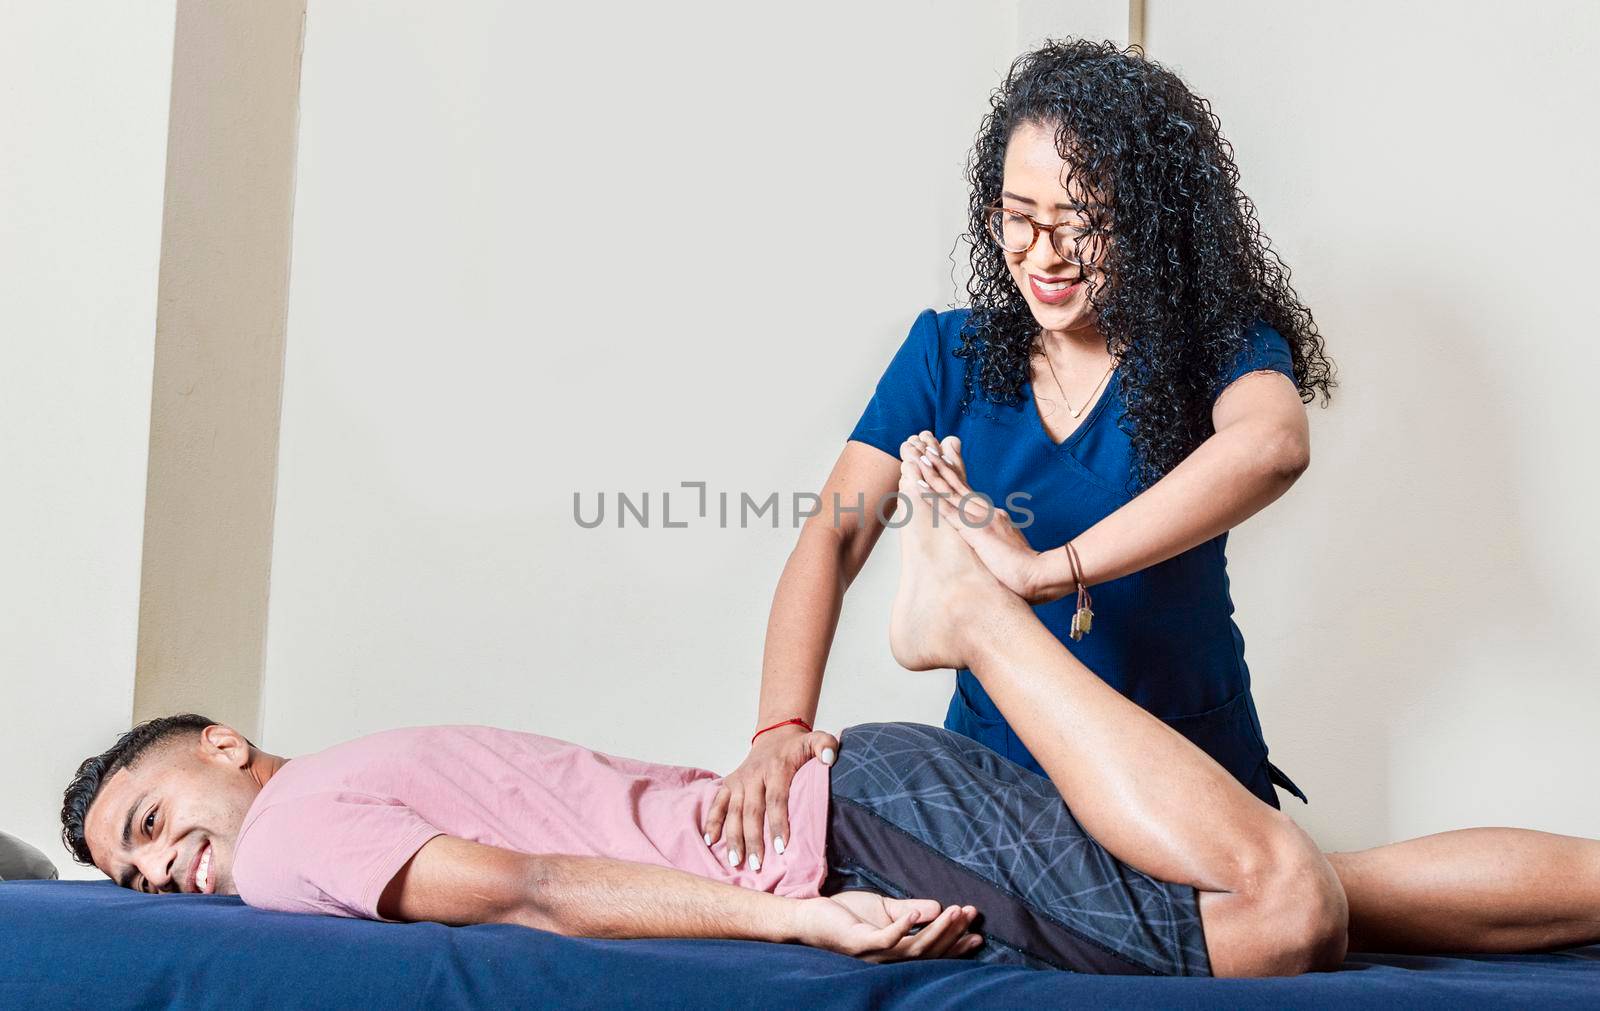 Physiotherapy rehabilitation concept, Physiotherapist with patient, Lumbar Physiotherapy.